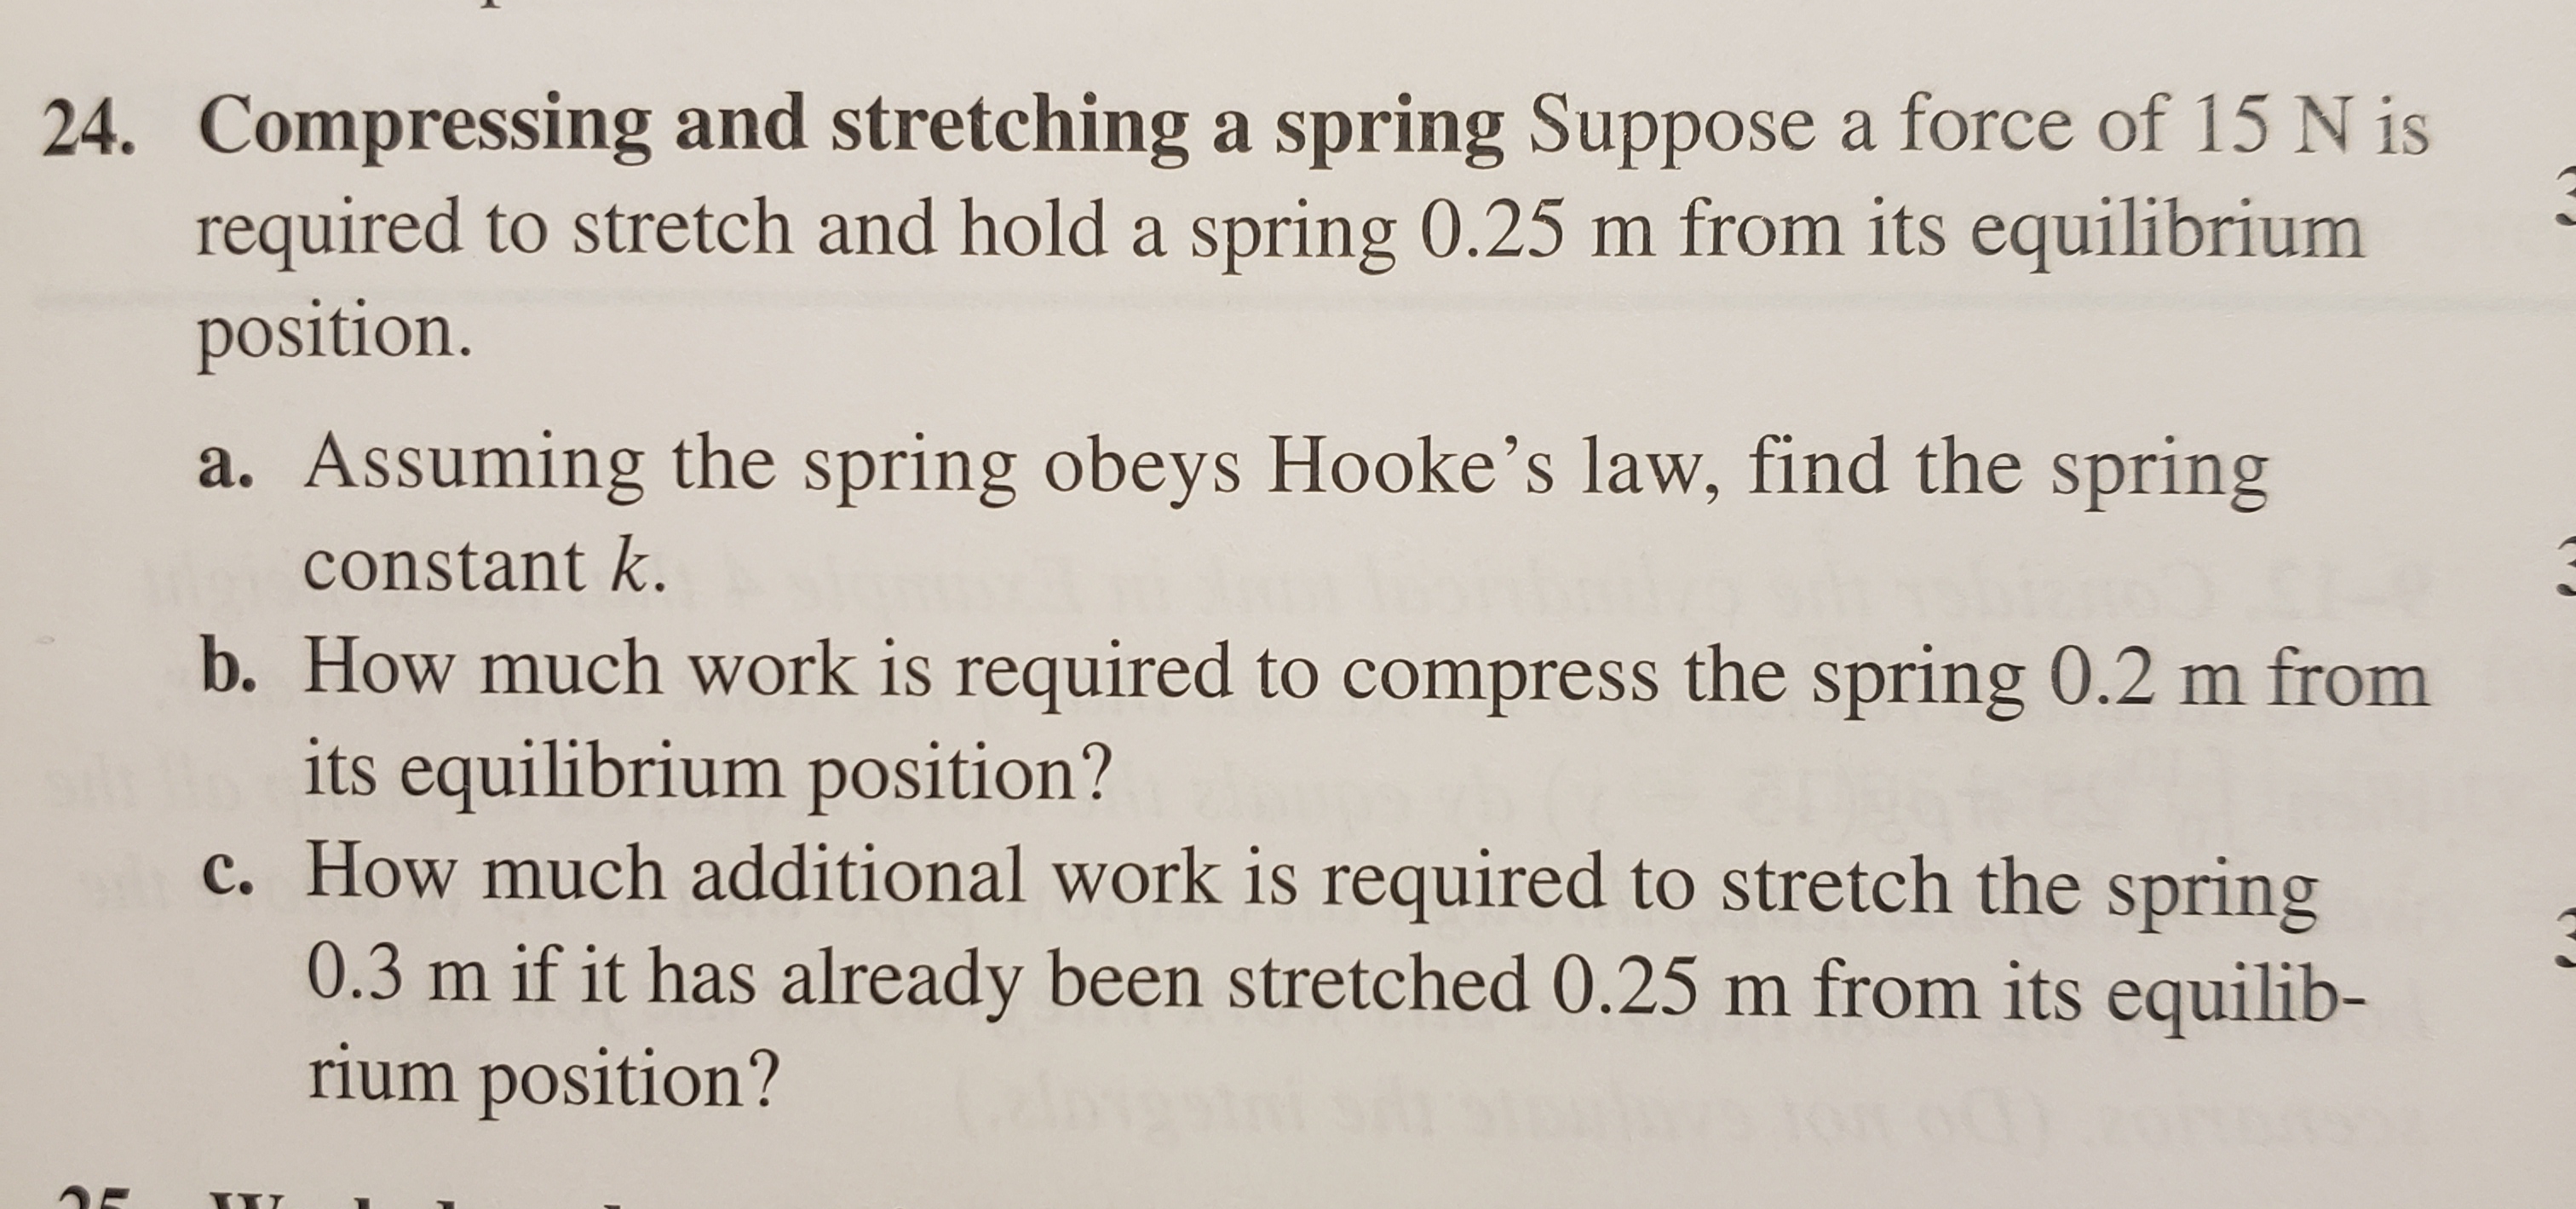 24. Compressing and stretching a spring Suppose a force of 15 N is
required to stretch and hold a spring 0.25 m from its equilibrium
position.
a. Assuming the spring obeys Hooke's law, find the spring
constant k.
b. How much work is required to compress the spring 0.2 m from
its equilibrium position?
c. How much additional work is required to stretch the spring
0.3 m if it has already been stretched 0.25 m from its equilib-
rium position?
